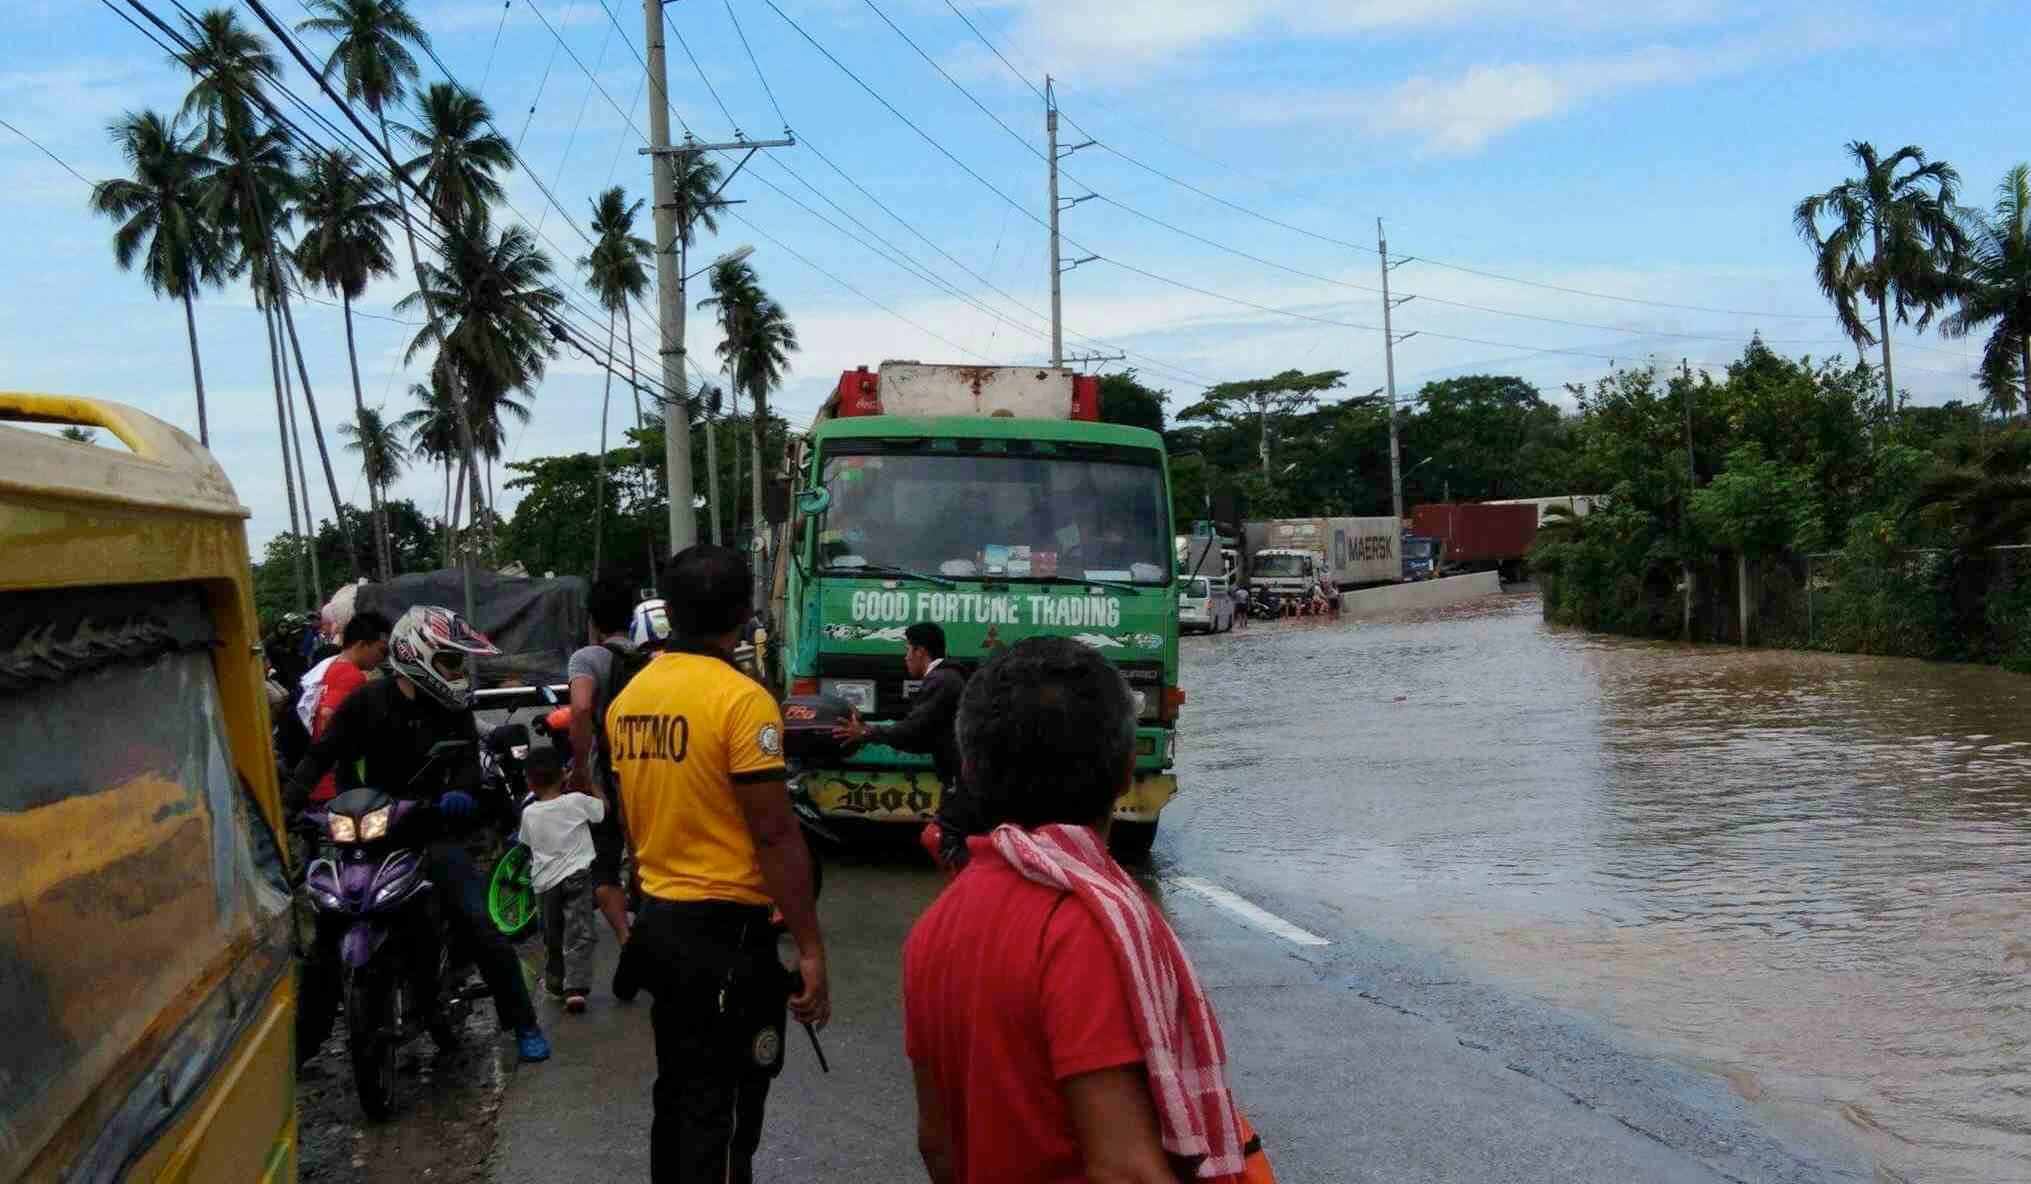 Over 100 families evacuated due to flooding in Davao City